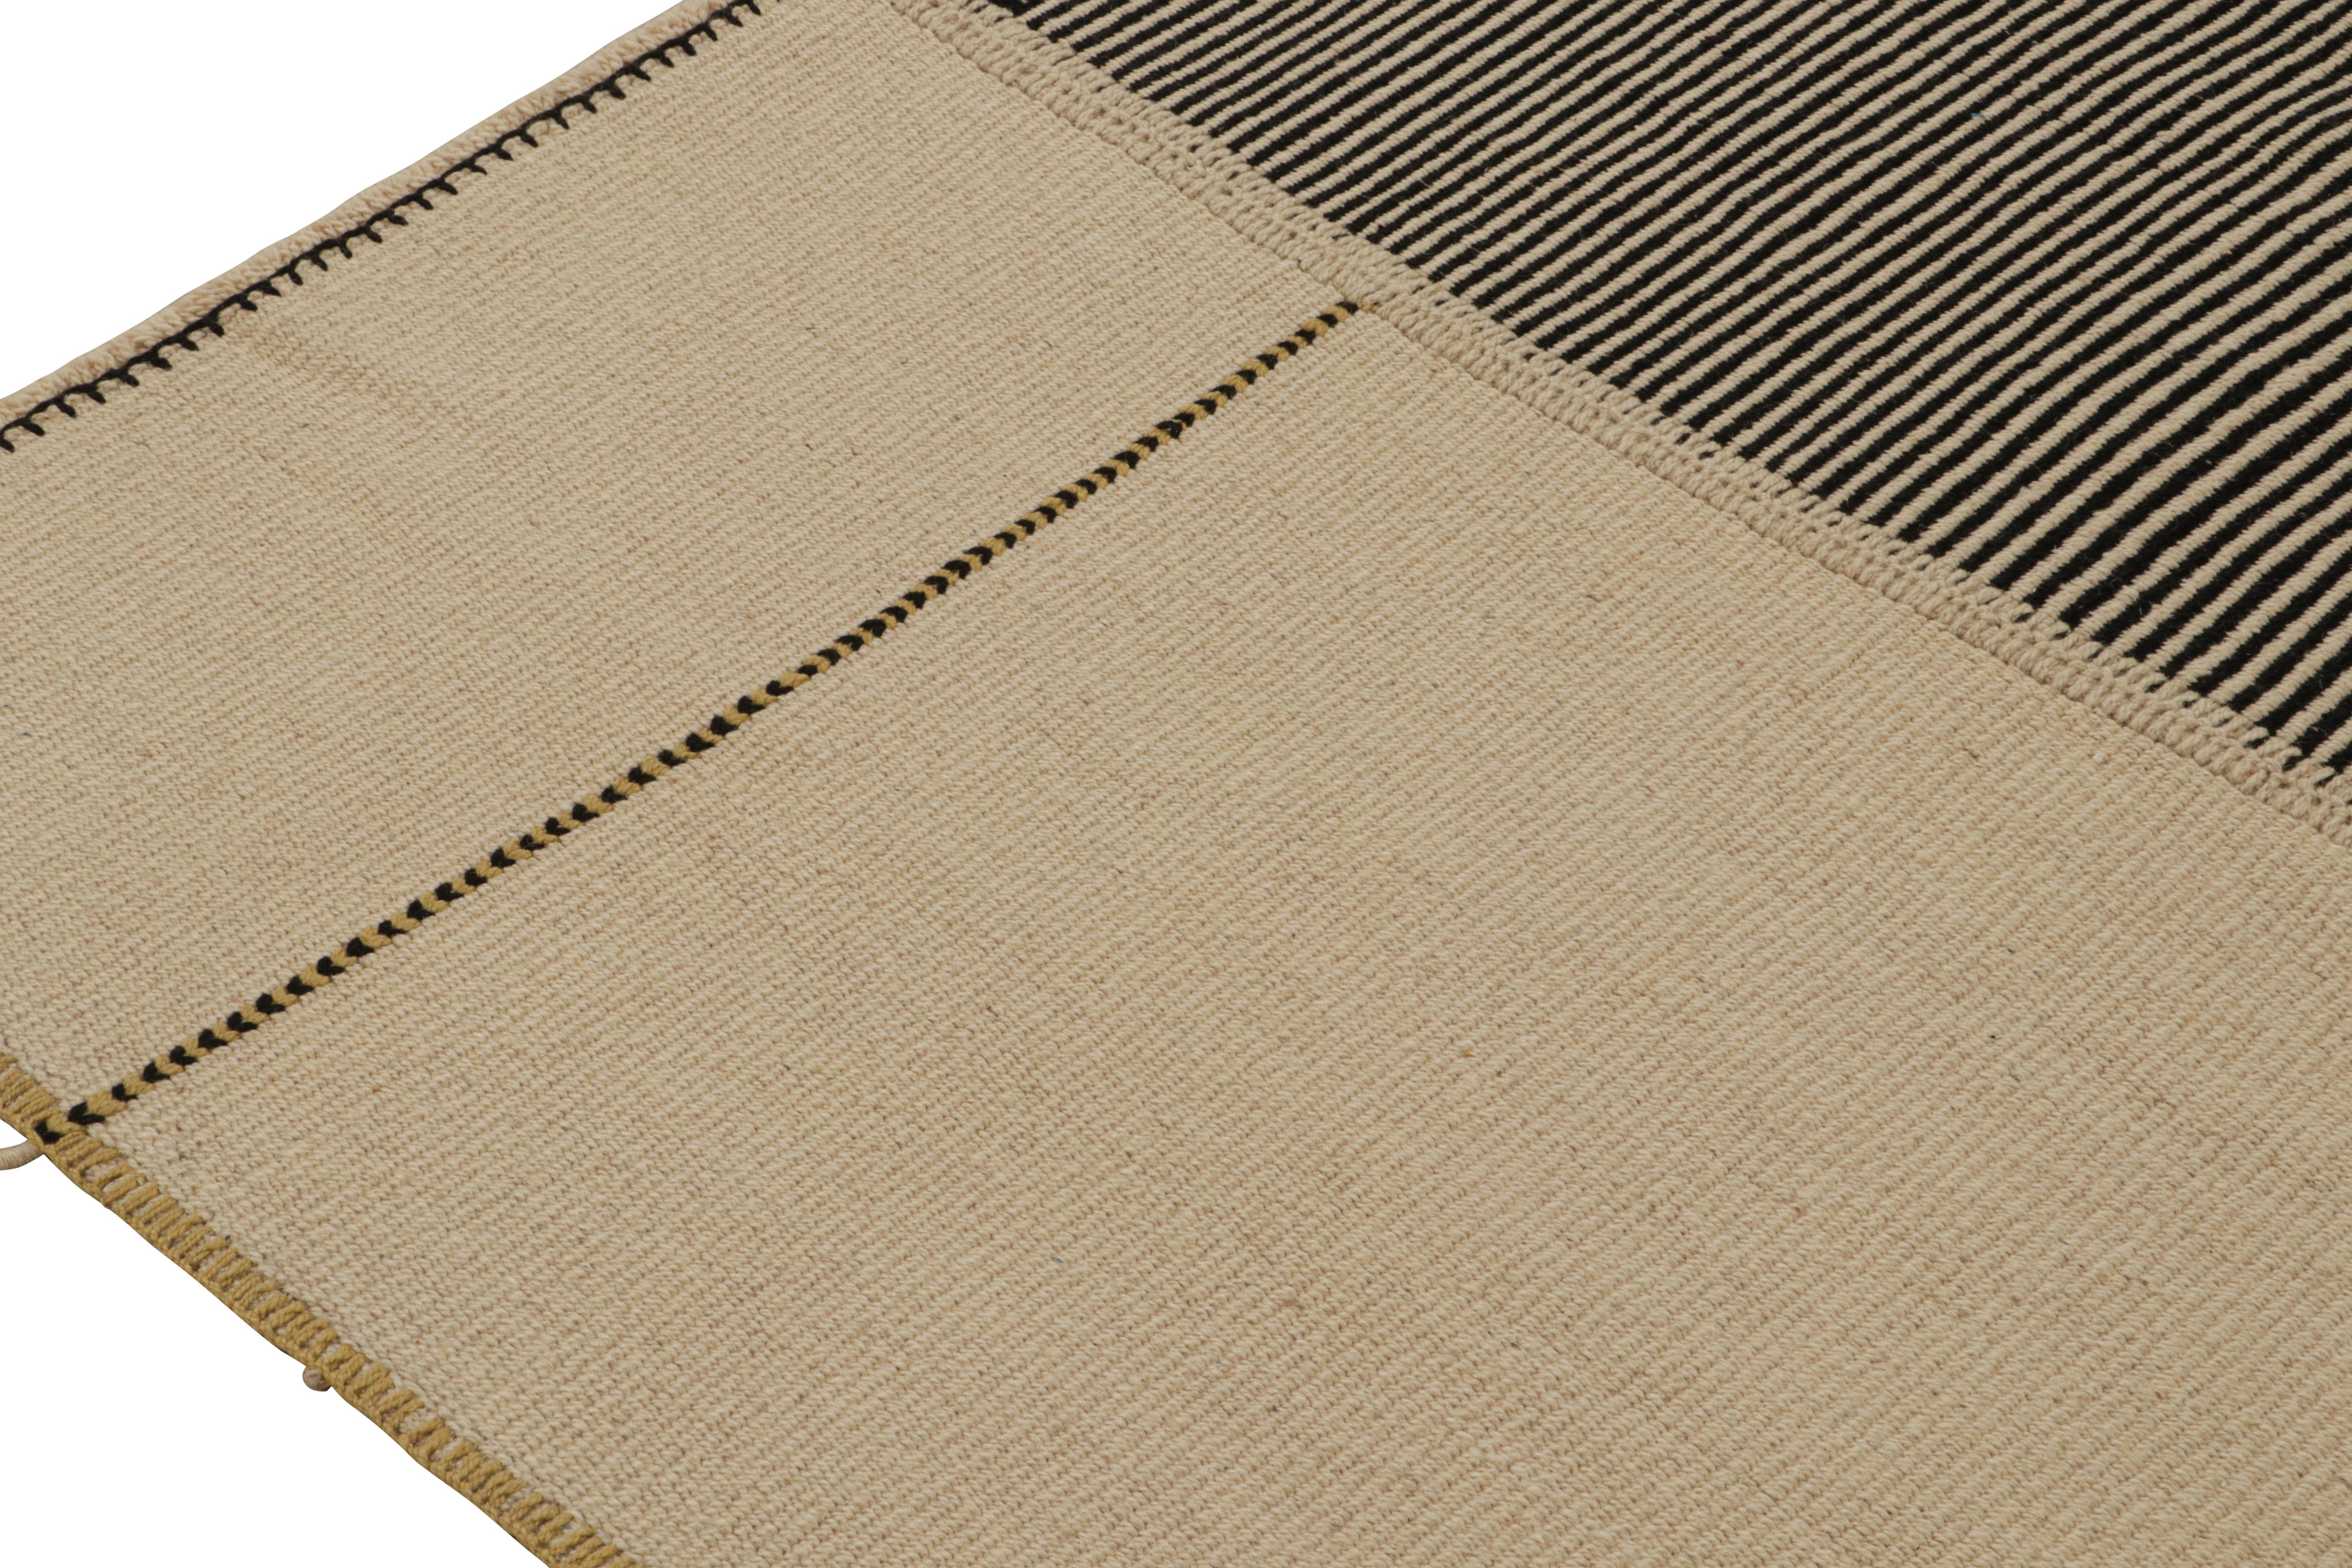 Rug & Kilim’s Modern Kilim Rug in Beige, Black & Gold Textural Stripes  In New Condition For Sale In Long Island City, NY